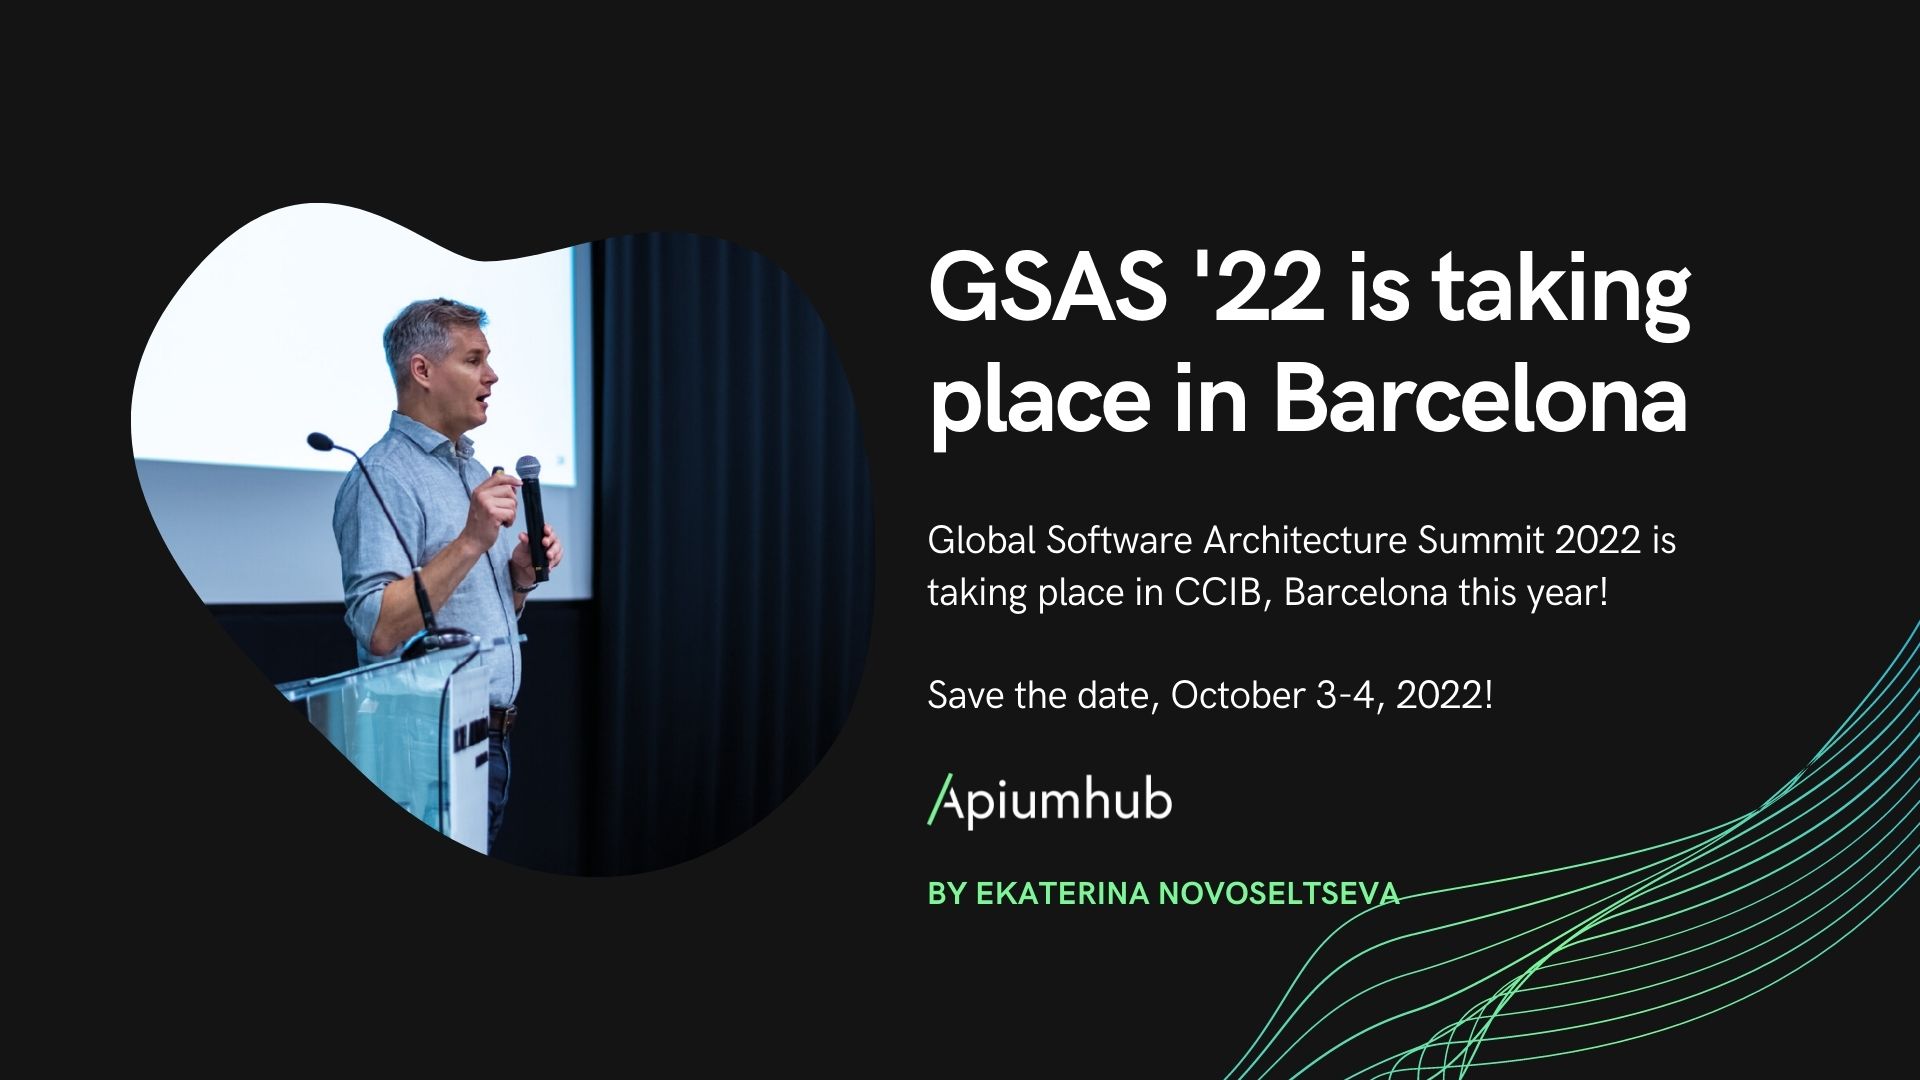 GSAS is taking place in CCIB, Barcelona this year